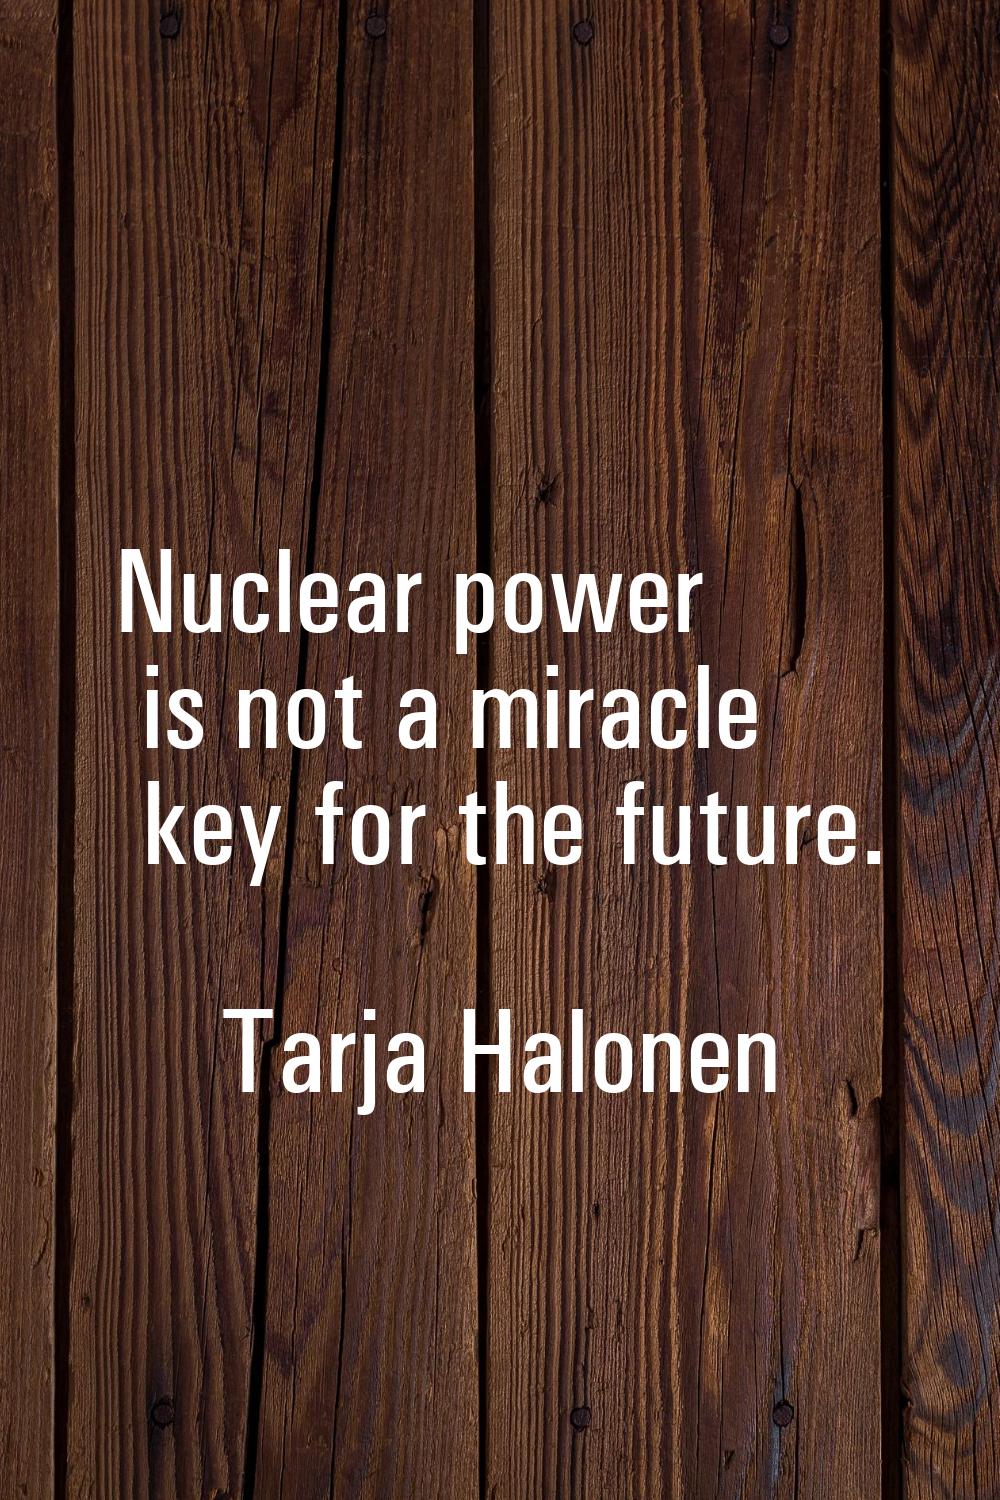 Nuclear power is not a miracle key for the future.